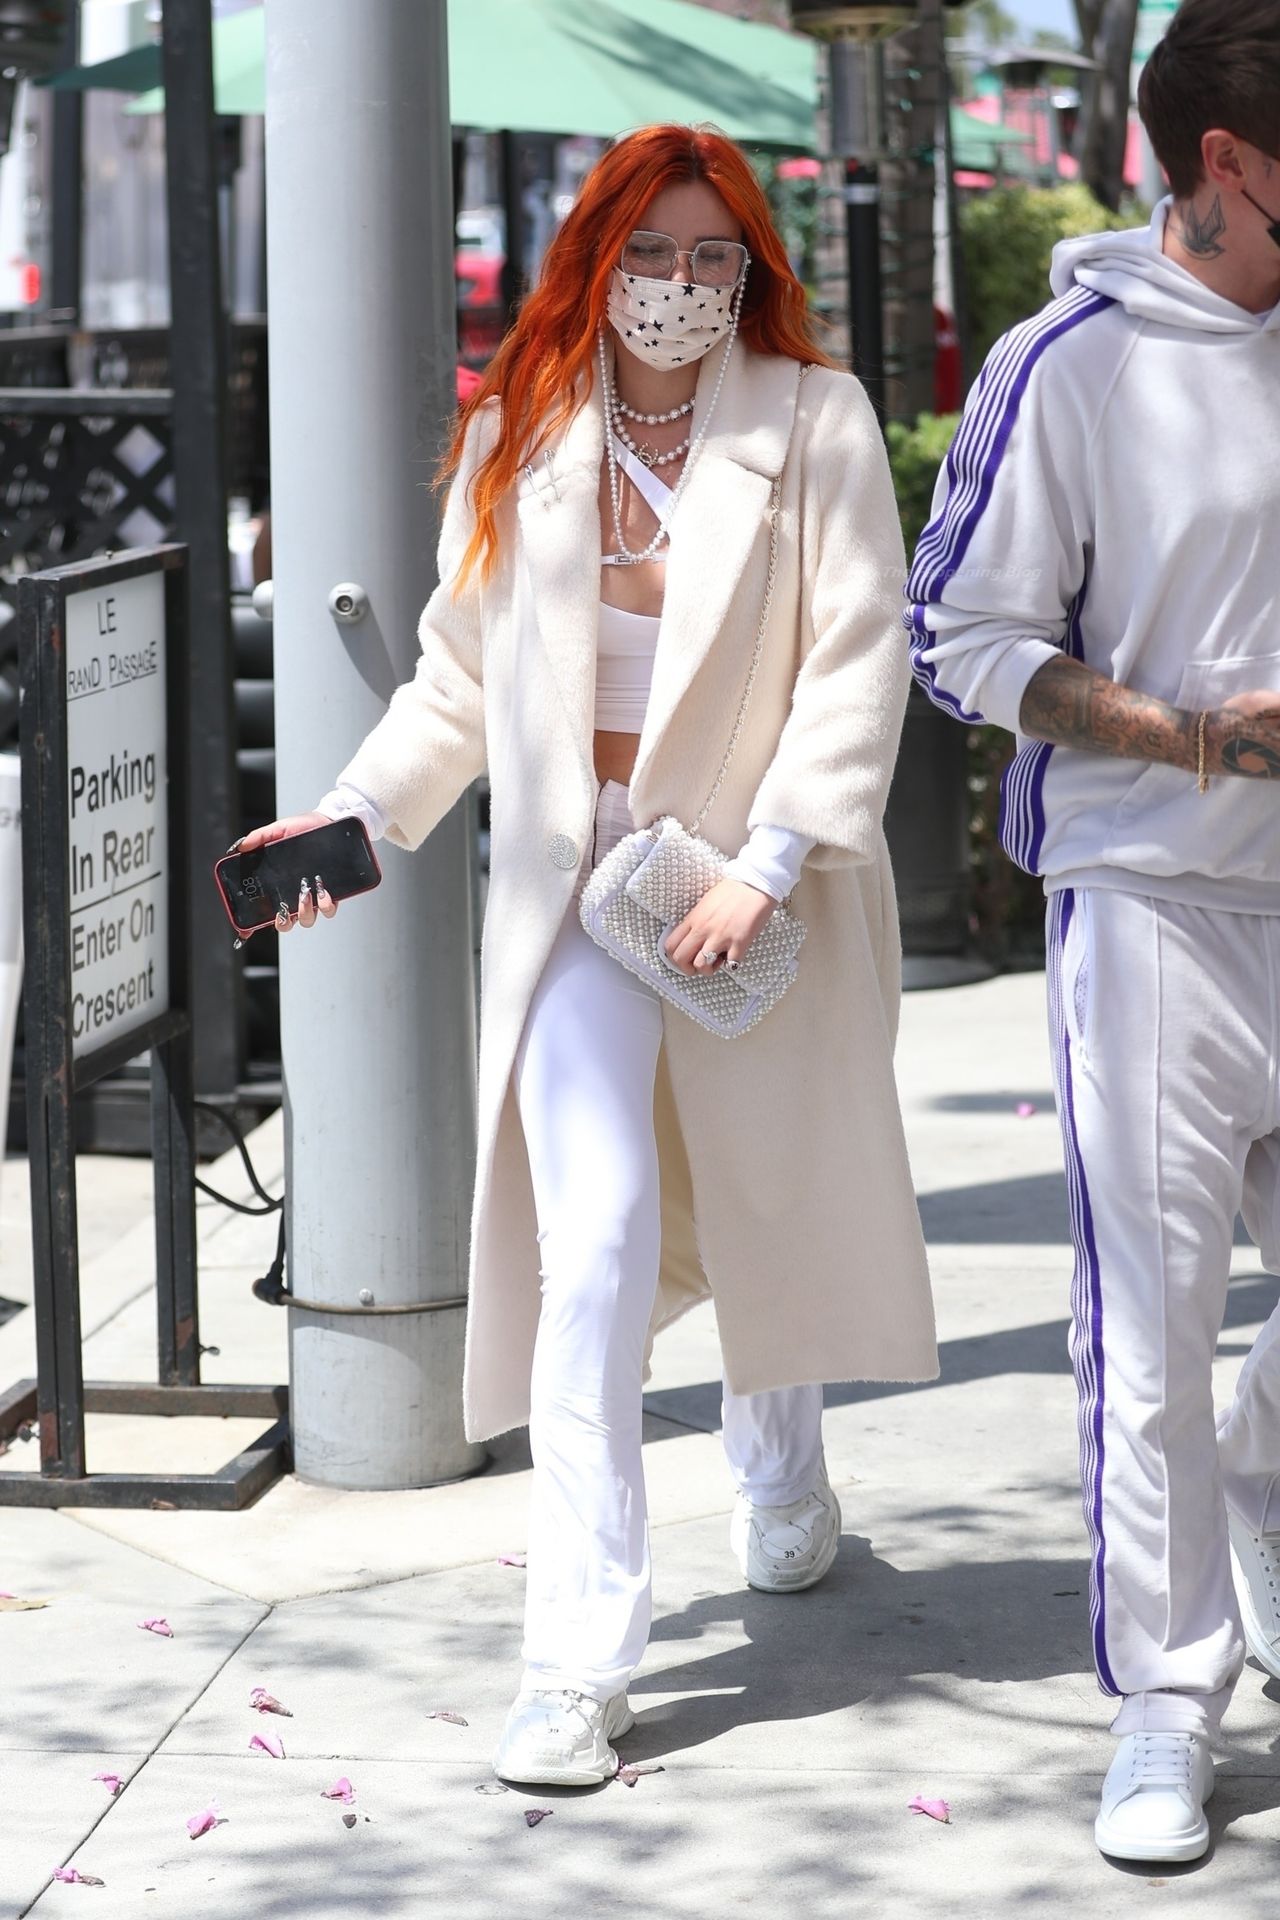 Bella Thorne & Benjamin Mascolo Match in All White For a Date at Il Pastaio (36 Photos)